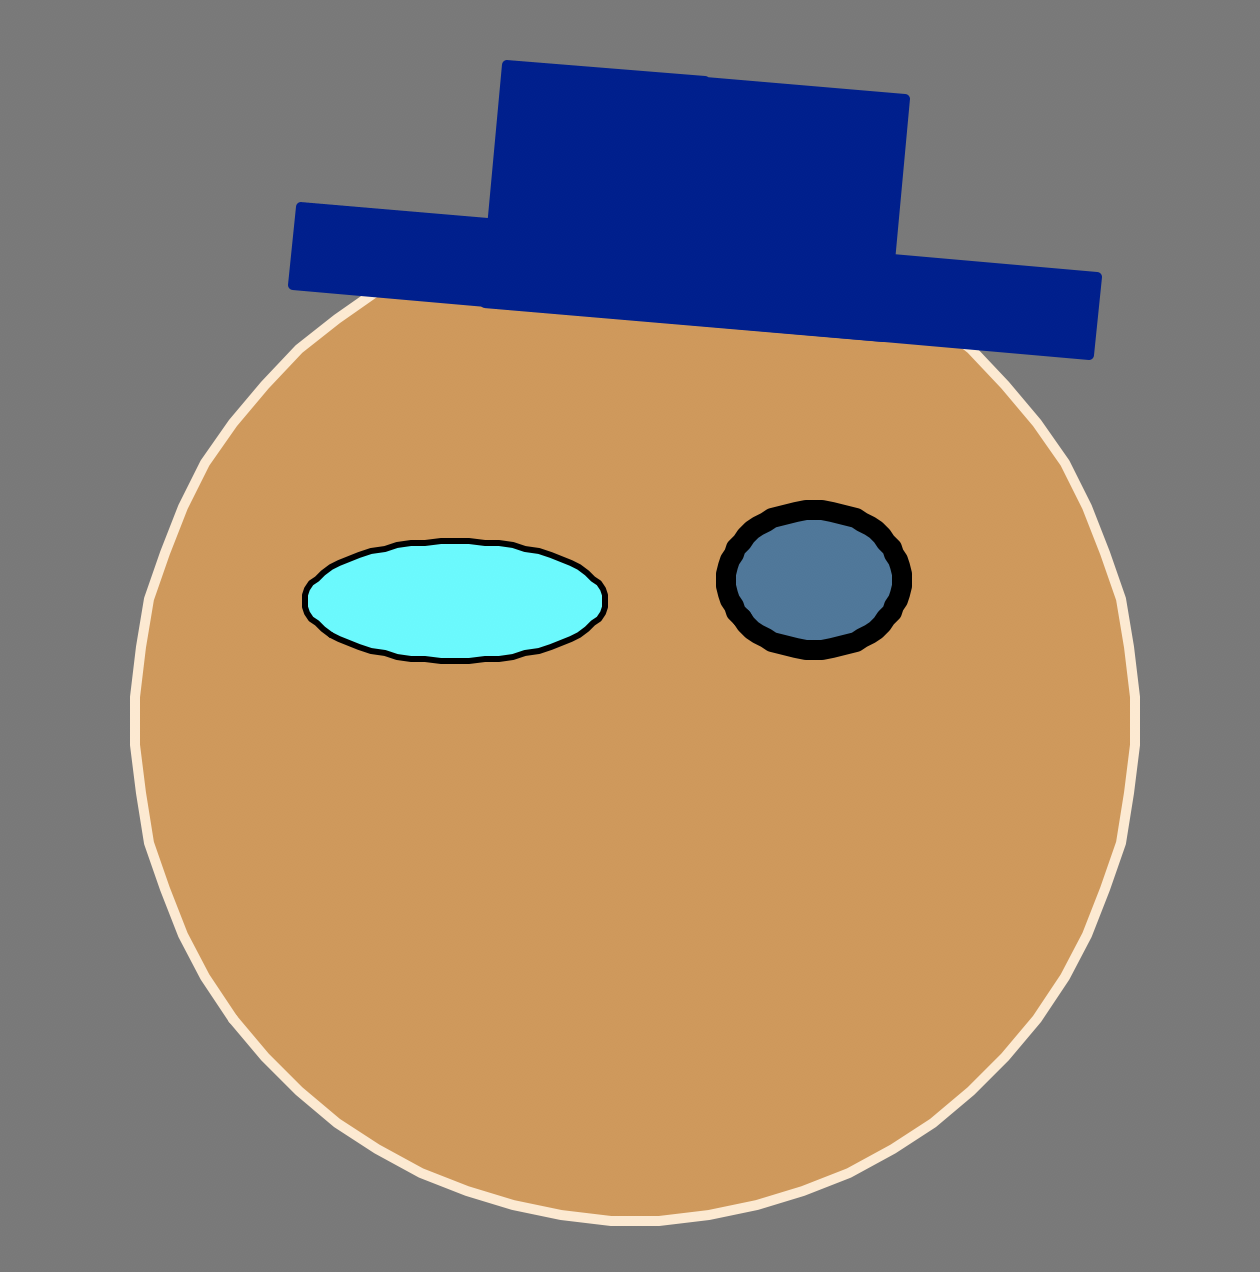 Smiley Hat 2: The same image but now with the hat tilted slightly clockwise.